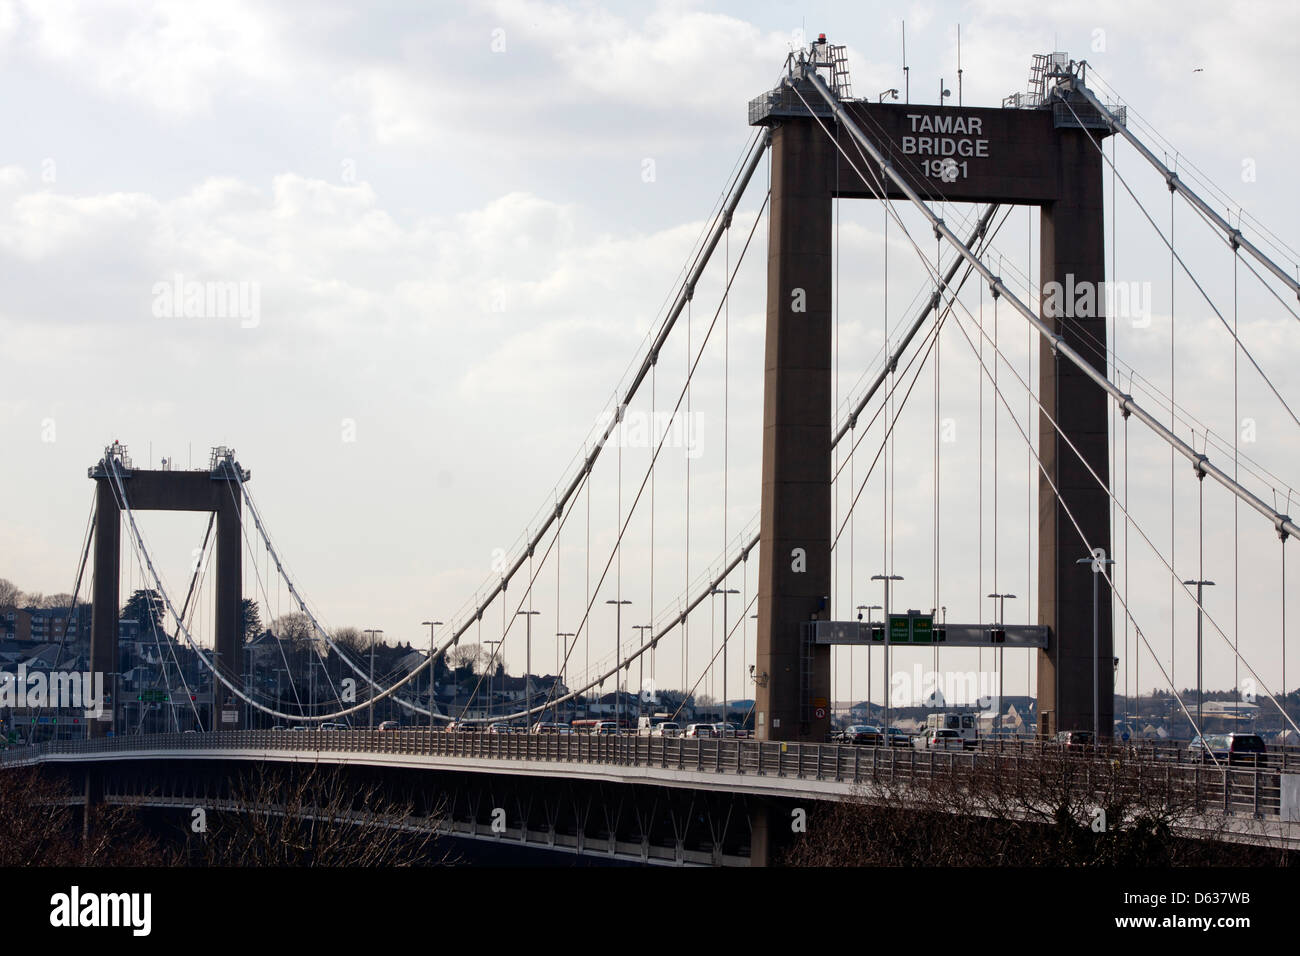 Tamar Toll Bridge separating Devon and Cornwall in the South West of England,UK. Stock Photo